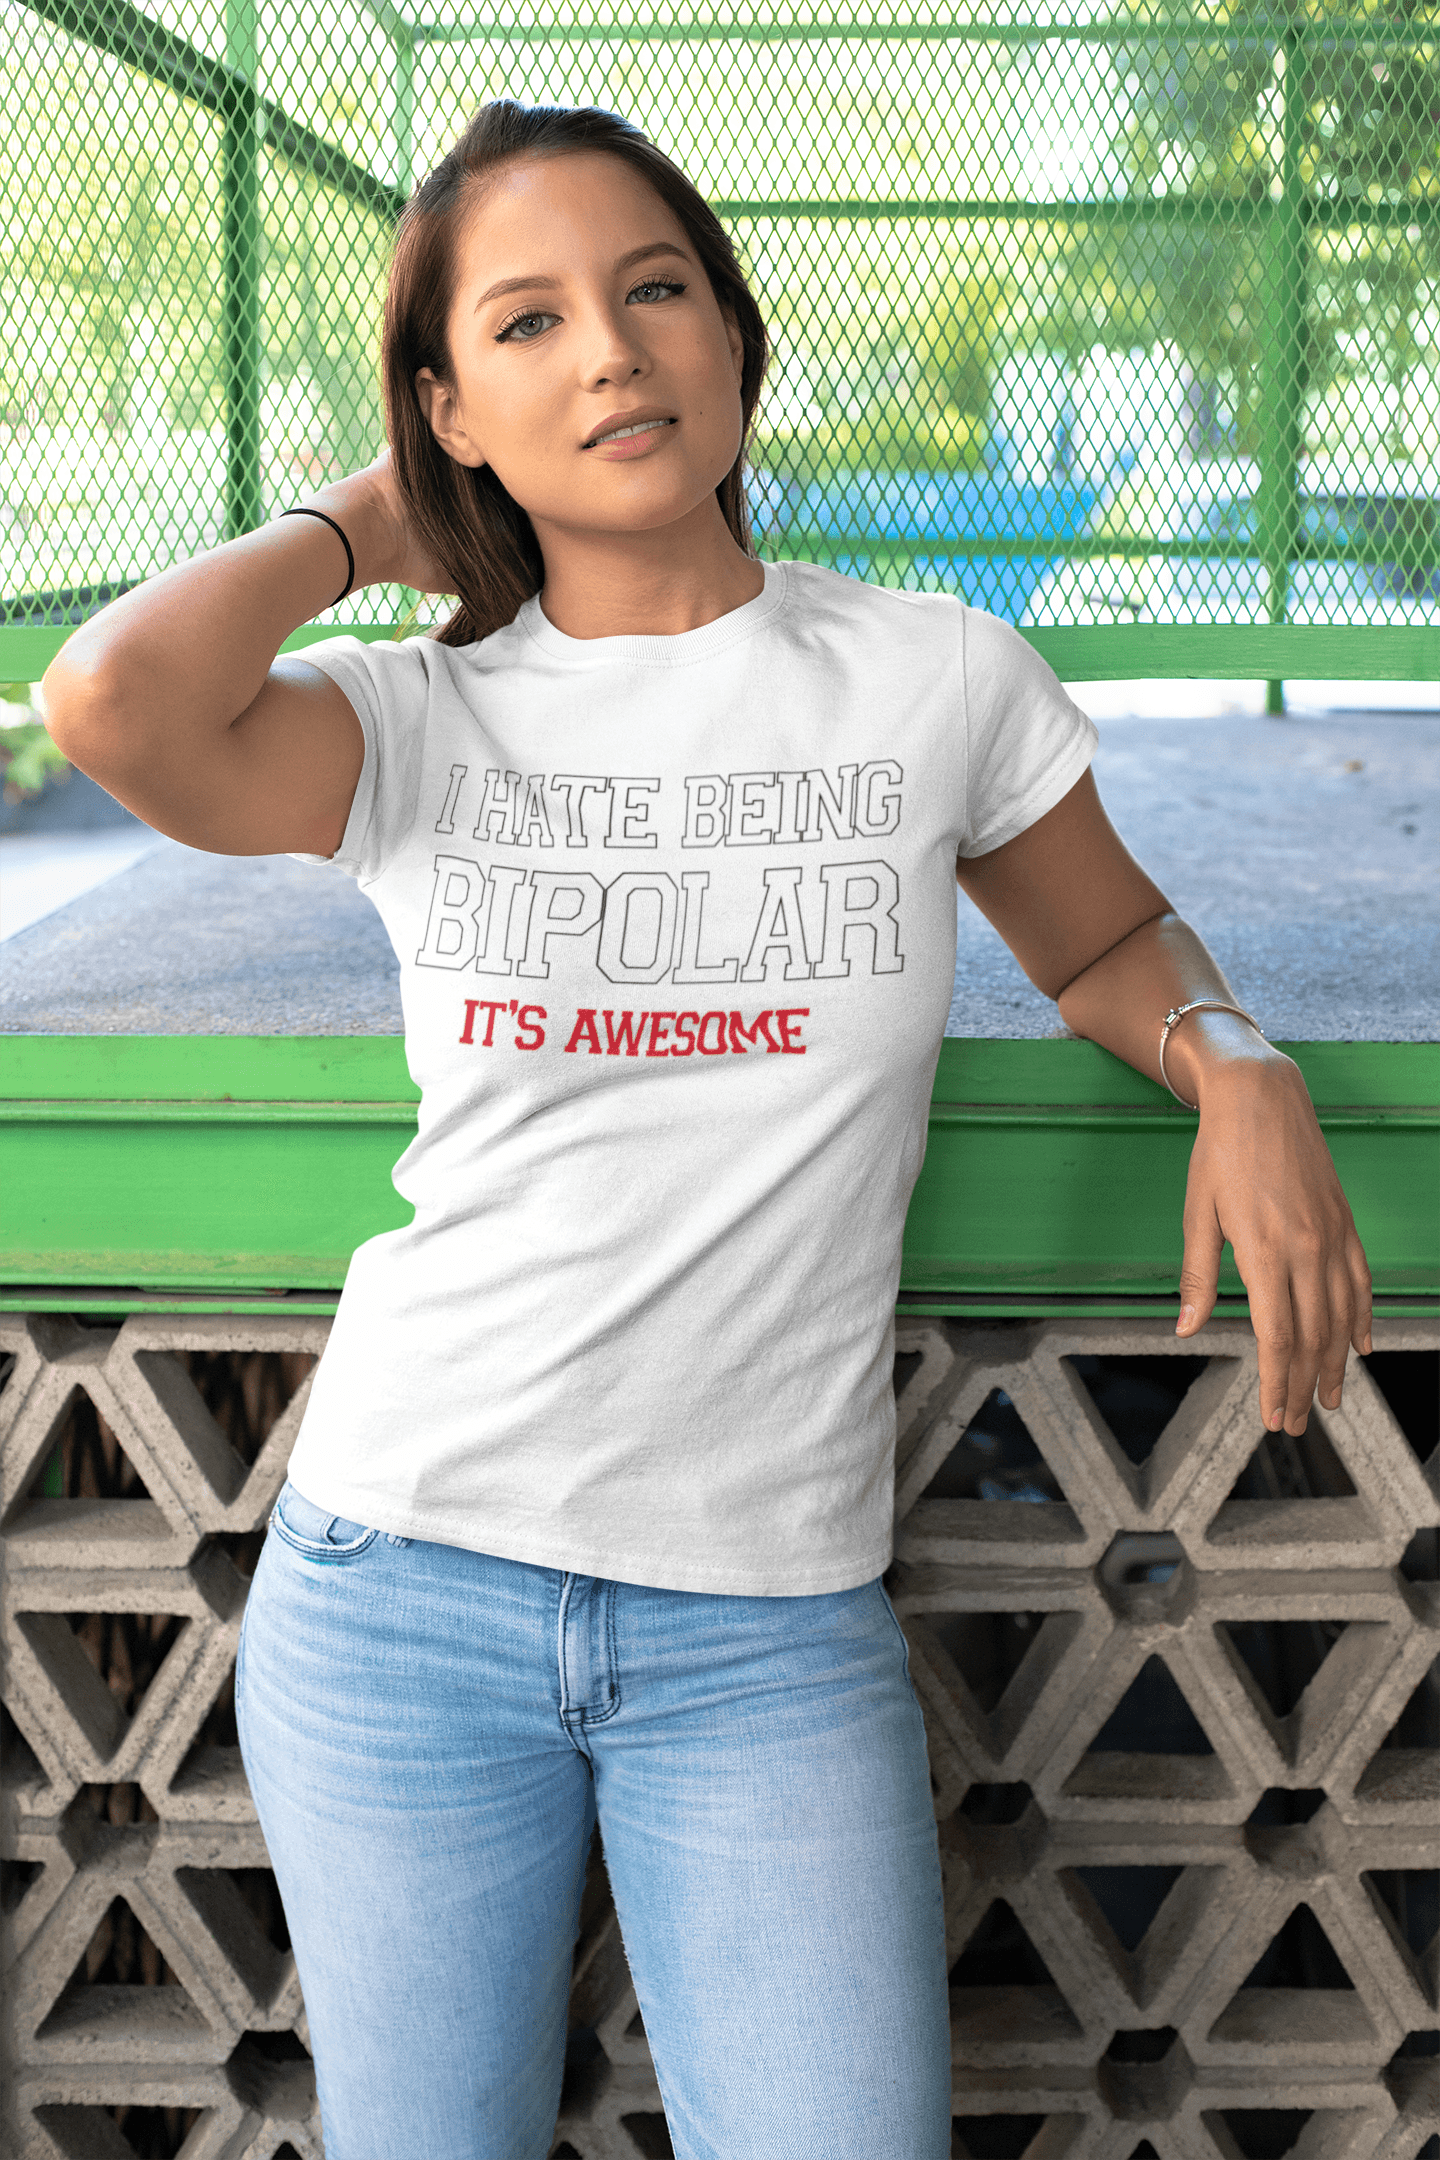 I Hate Being Bi-Polar It's Awesome Top Koala Sofstyle Unisex Tee